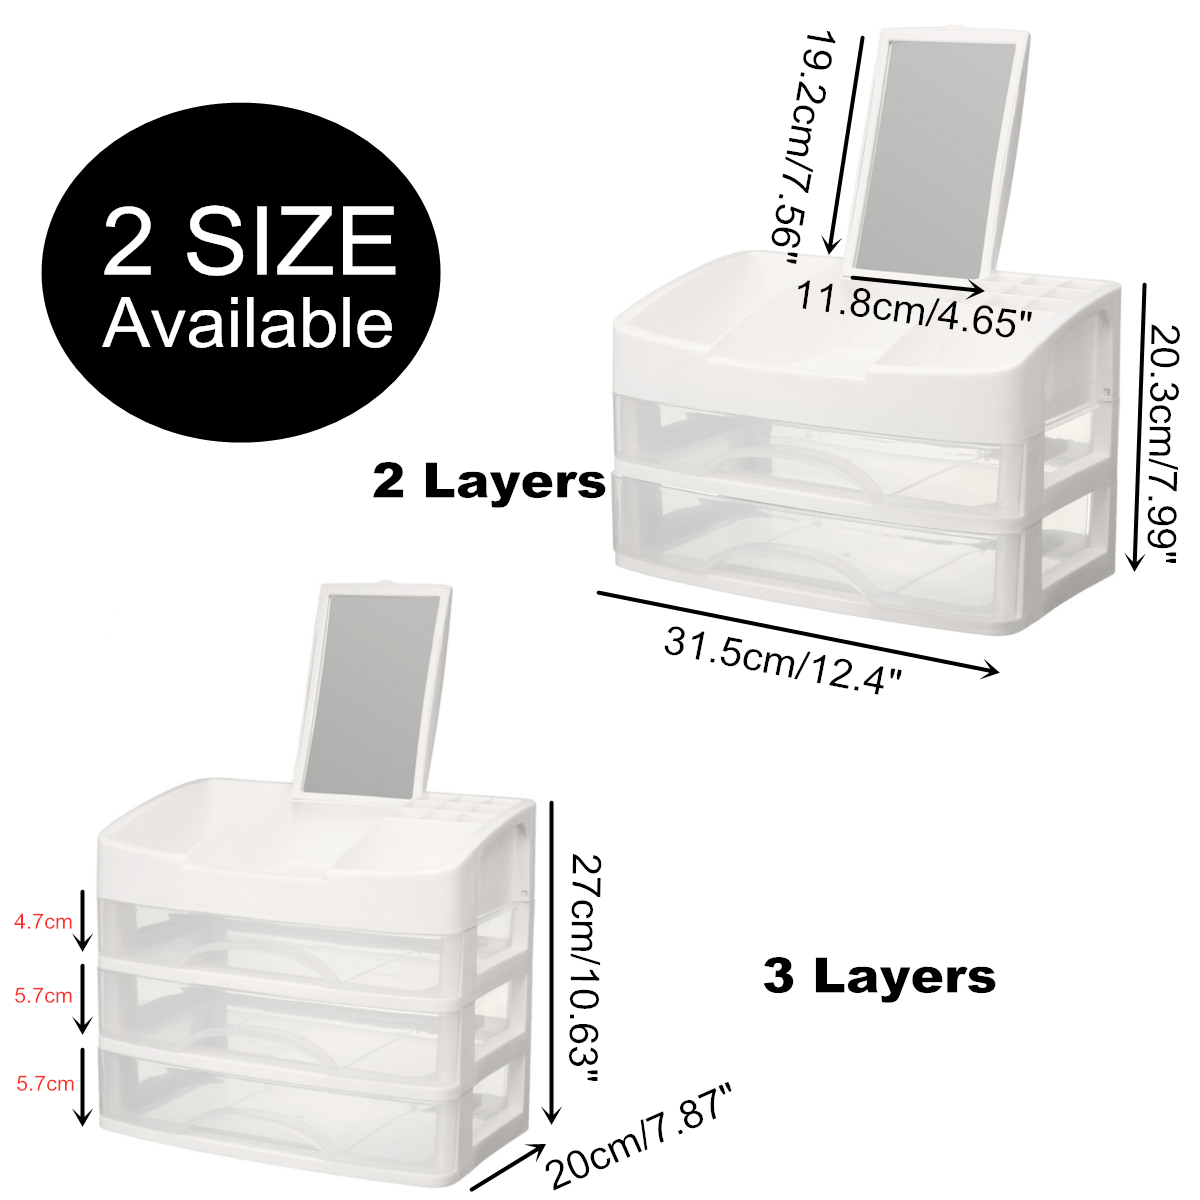 23-Layers-Clear-Drawers-Makeup-Case-Cosmetic-Organizer-Storage-Jewelry-Box-Holder-1490773-7